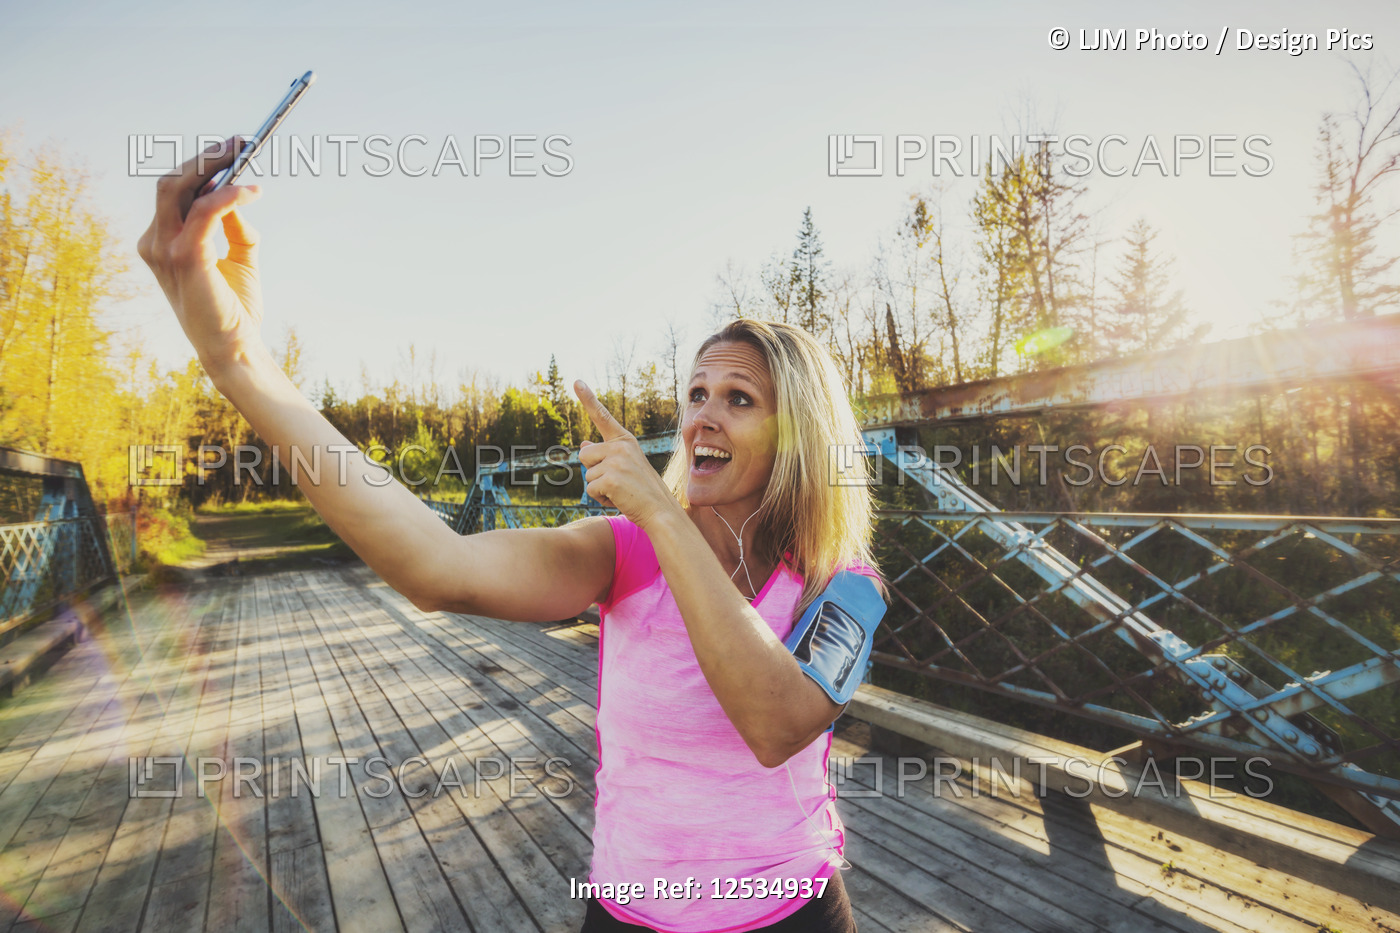 A woman wearing active wear and an arm band for her cell phone stands on a ...